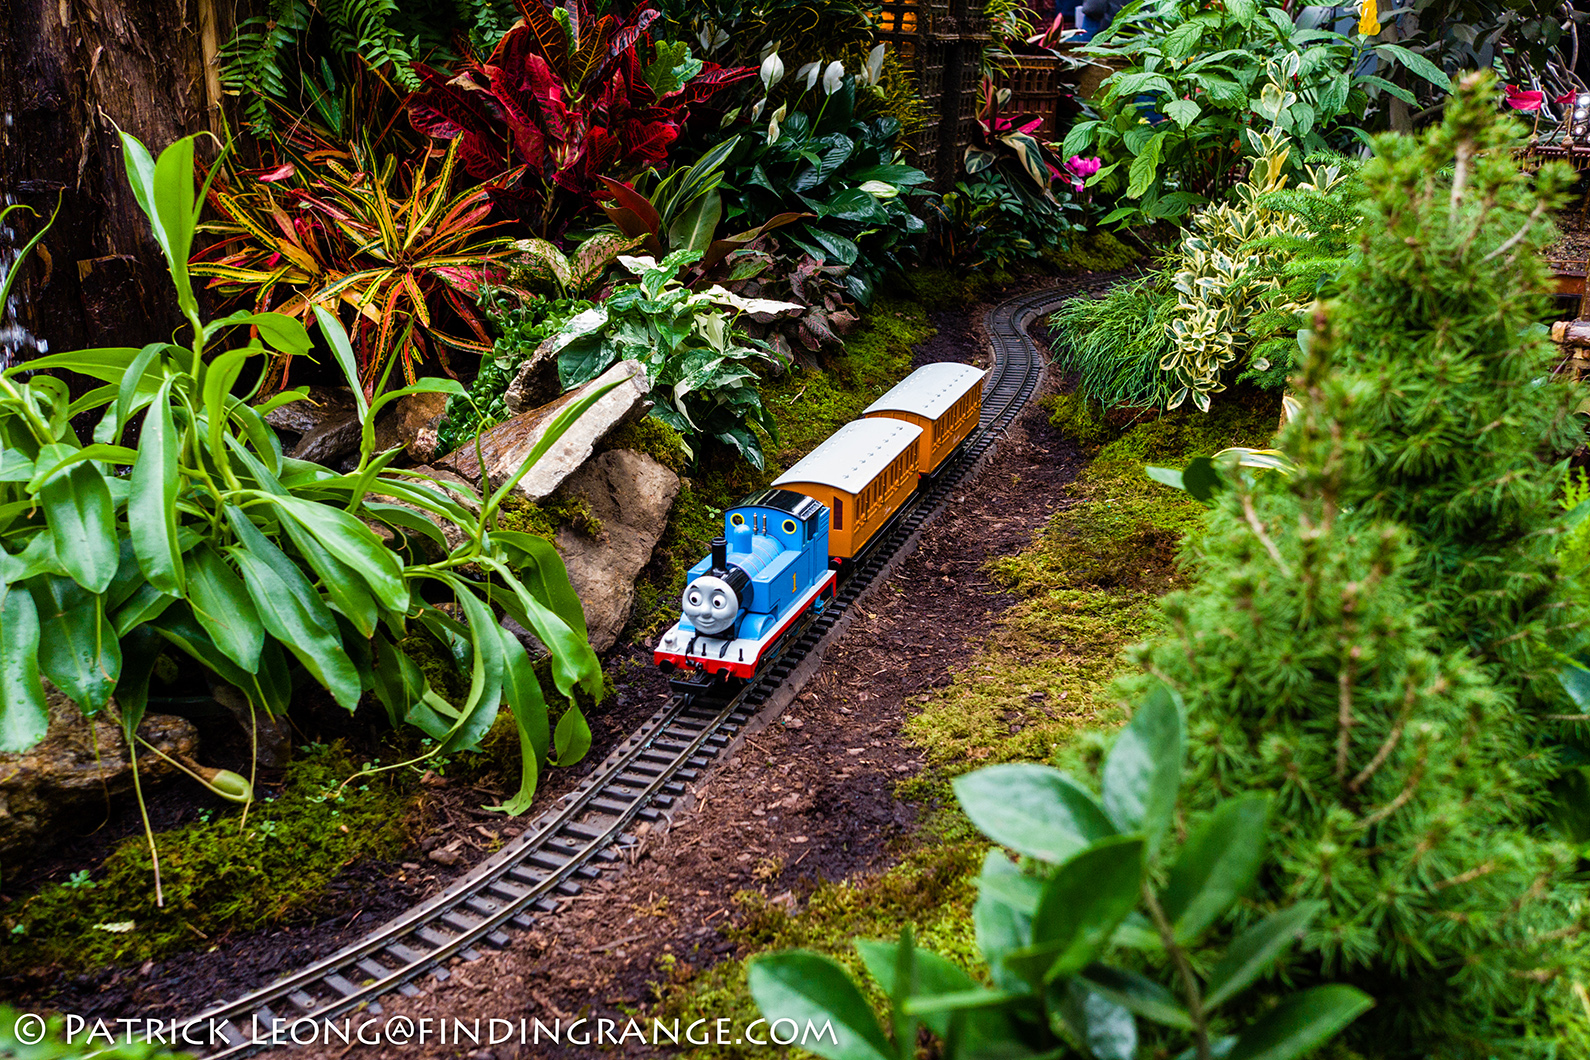 Leica X Typ 113 Pics From The Holiday Train Show